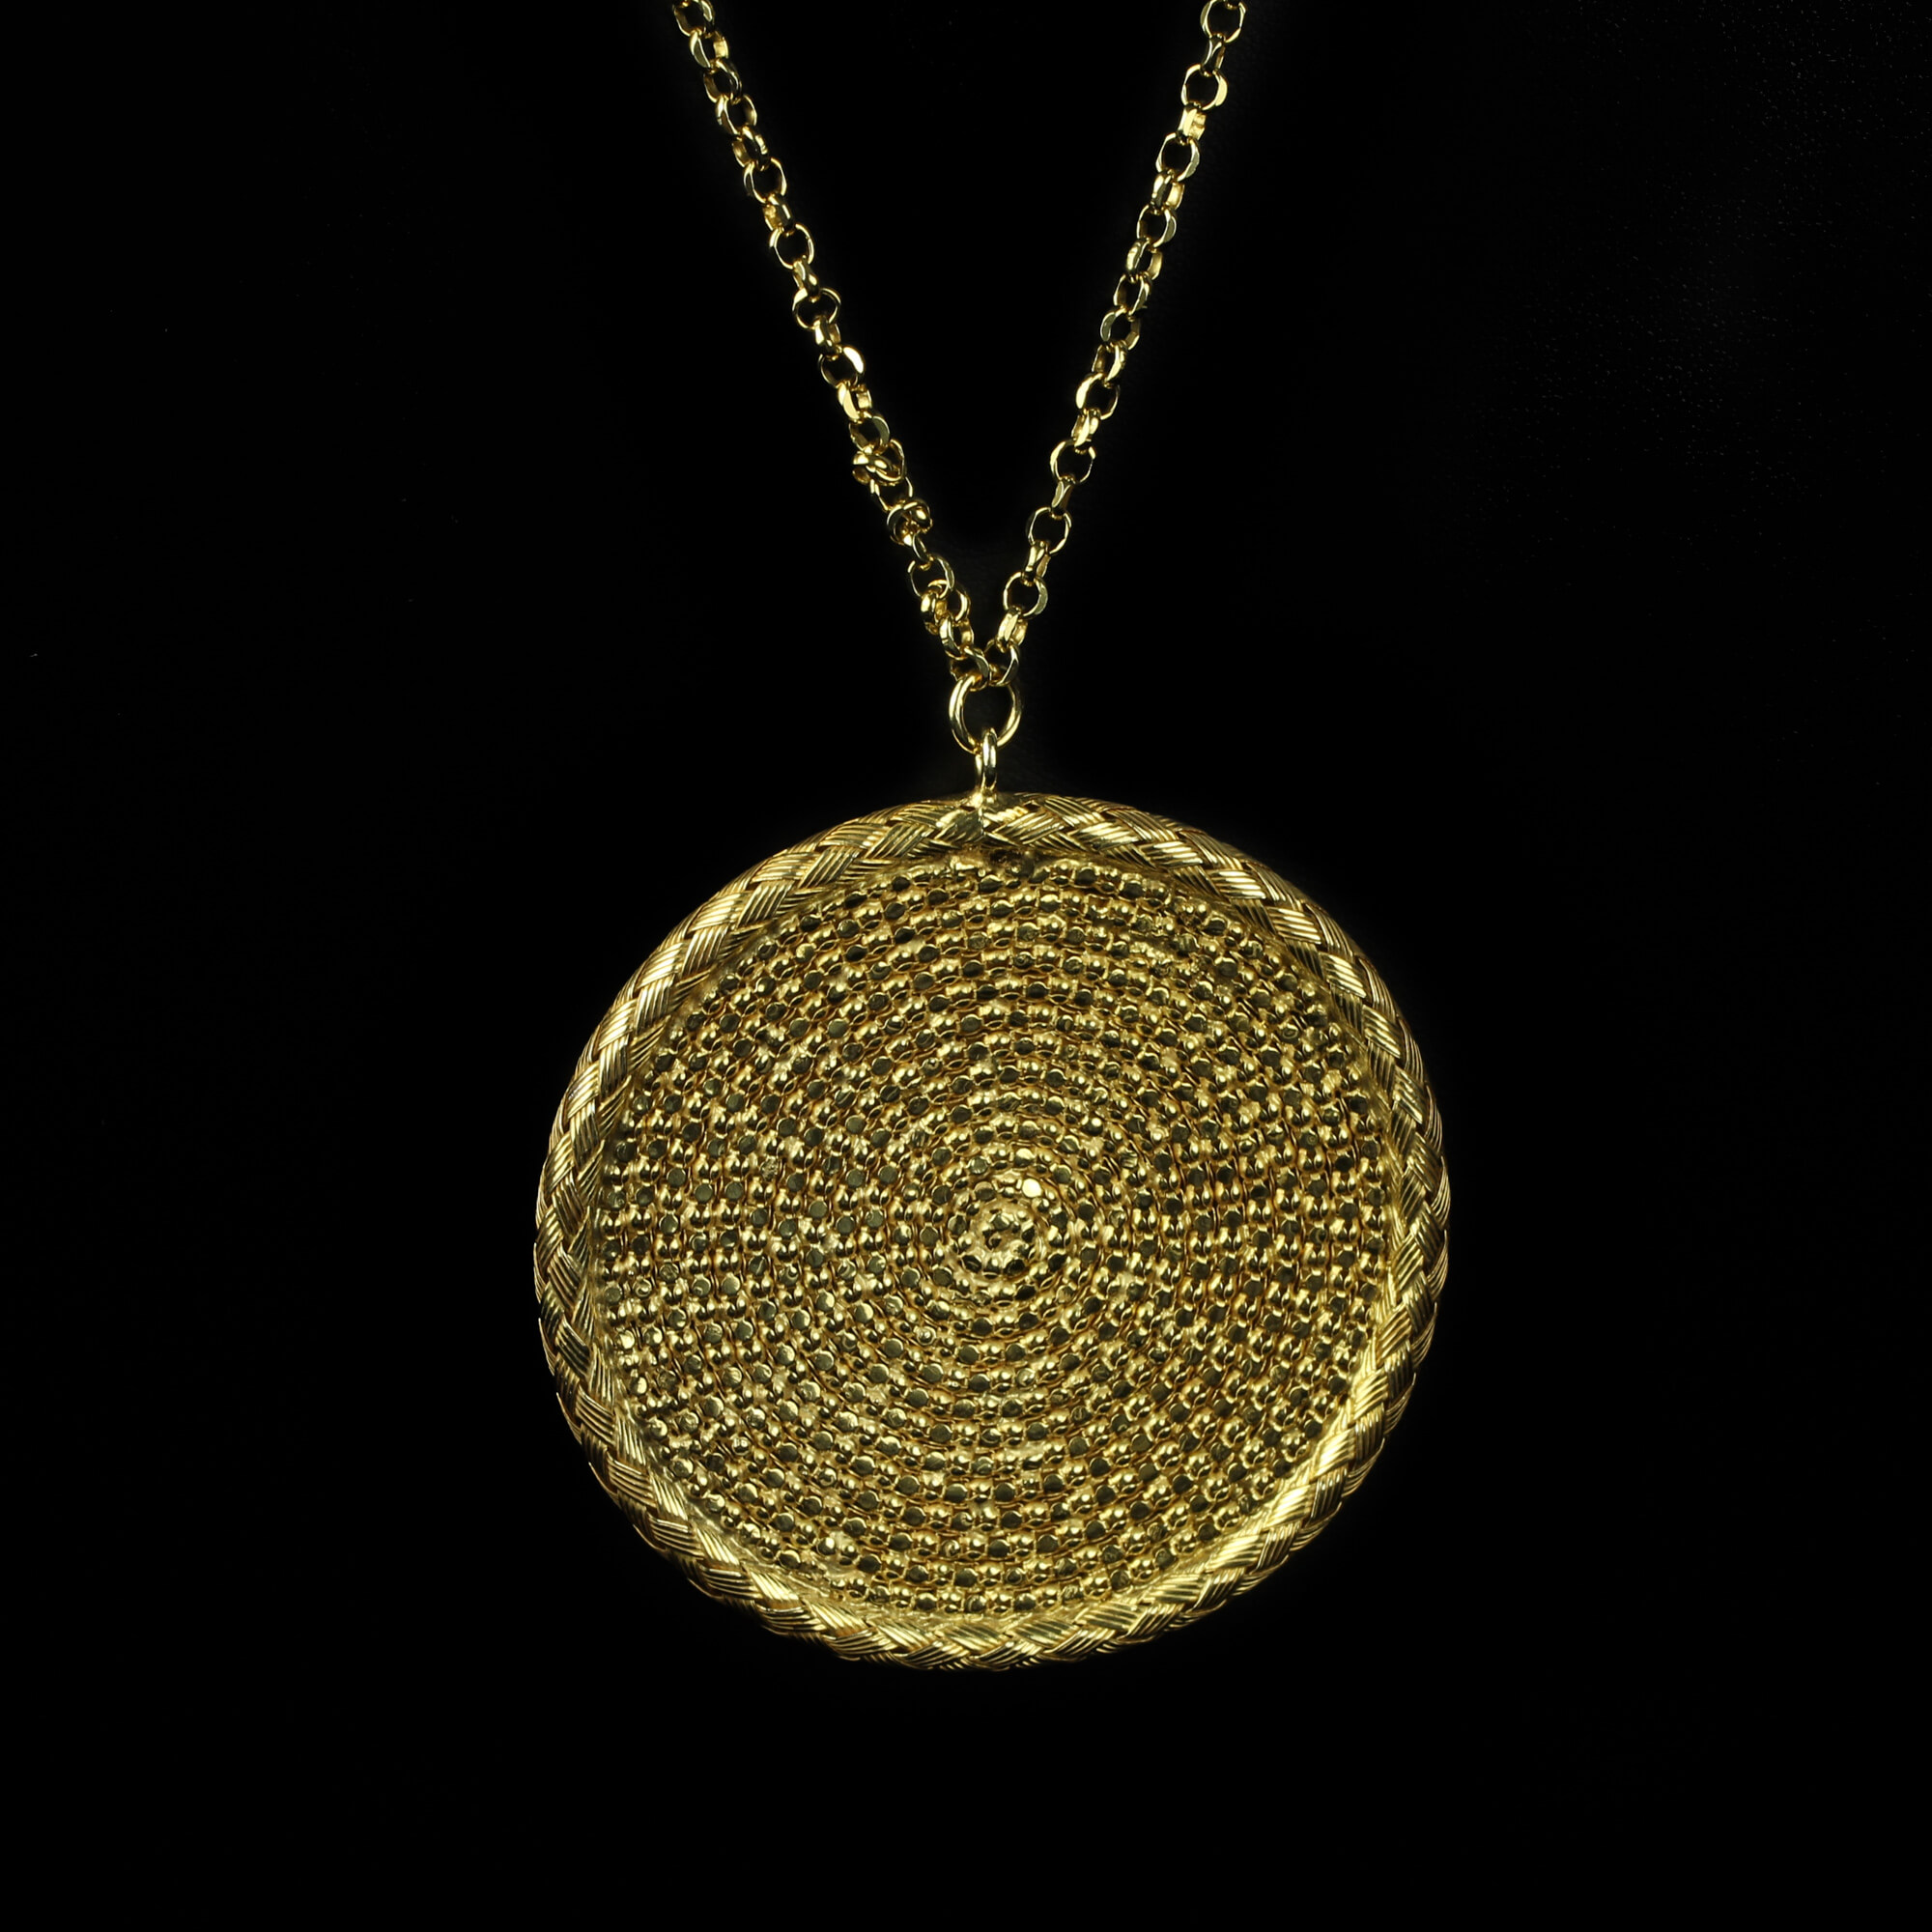 Long gold necklace with a round pendant